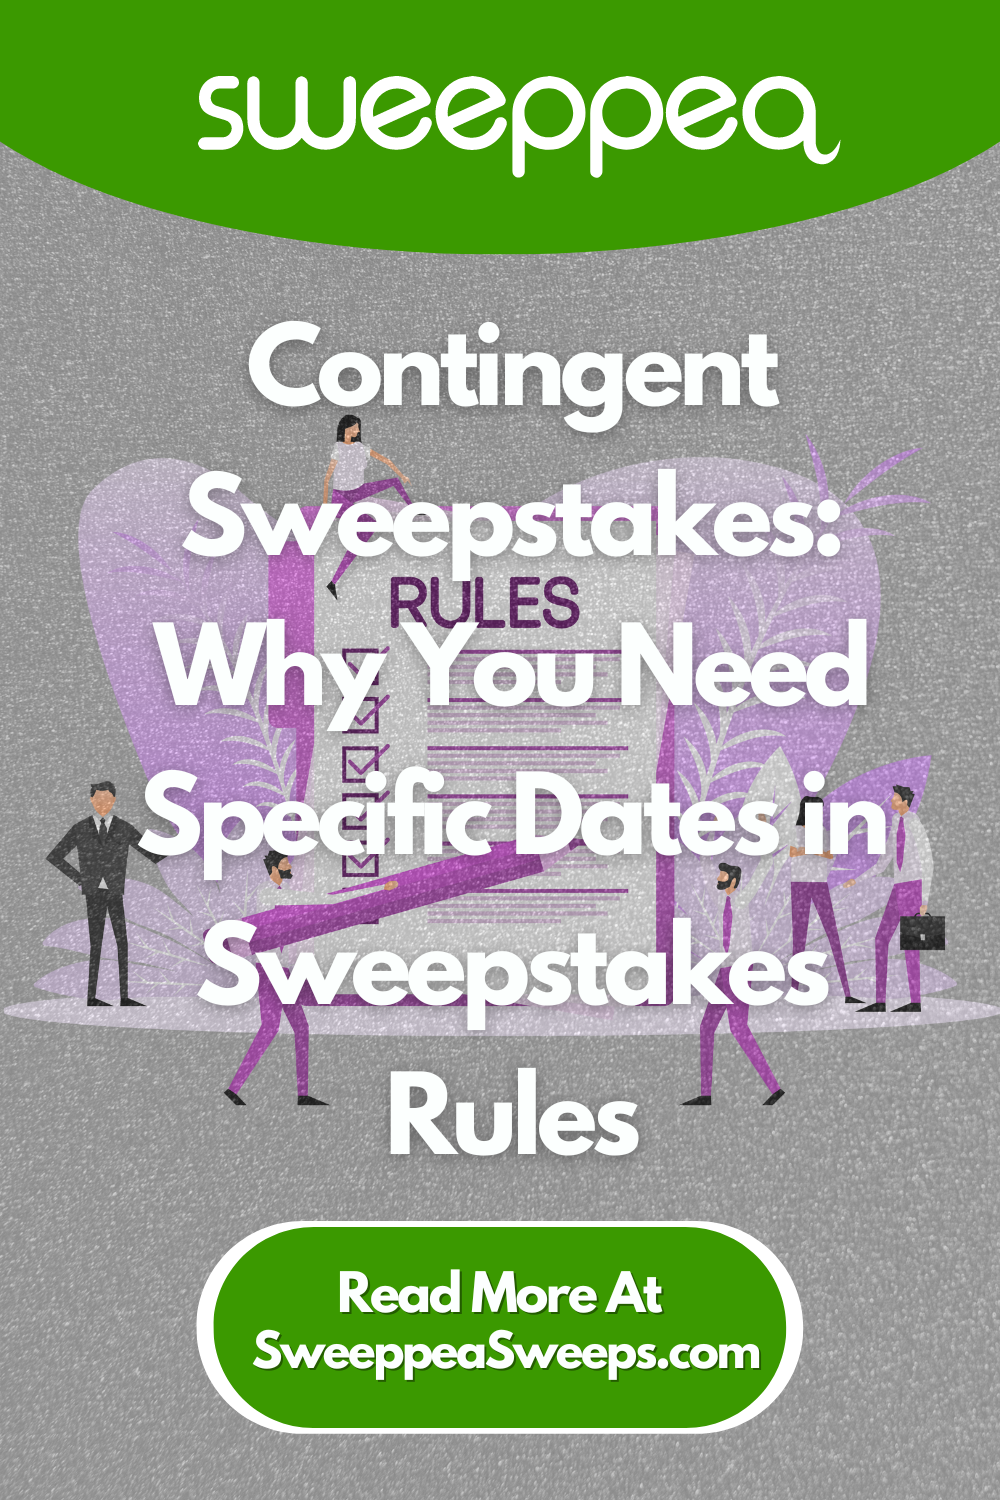 Contingent Sweepstakes: Why You Need Specific Dates in Sweepstakes Rules